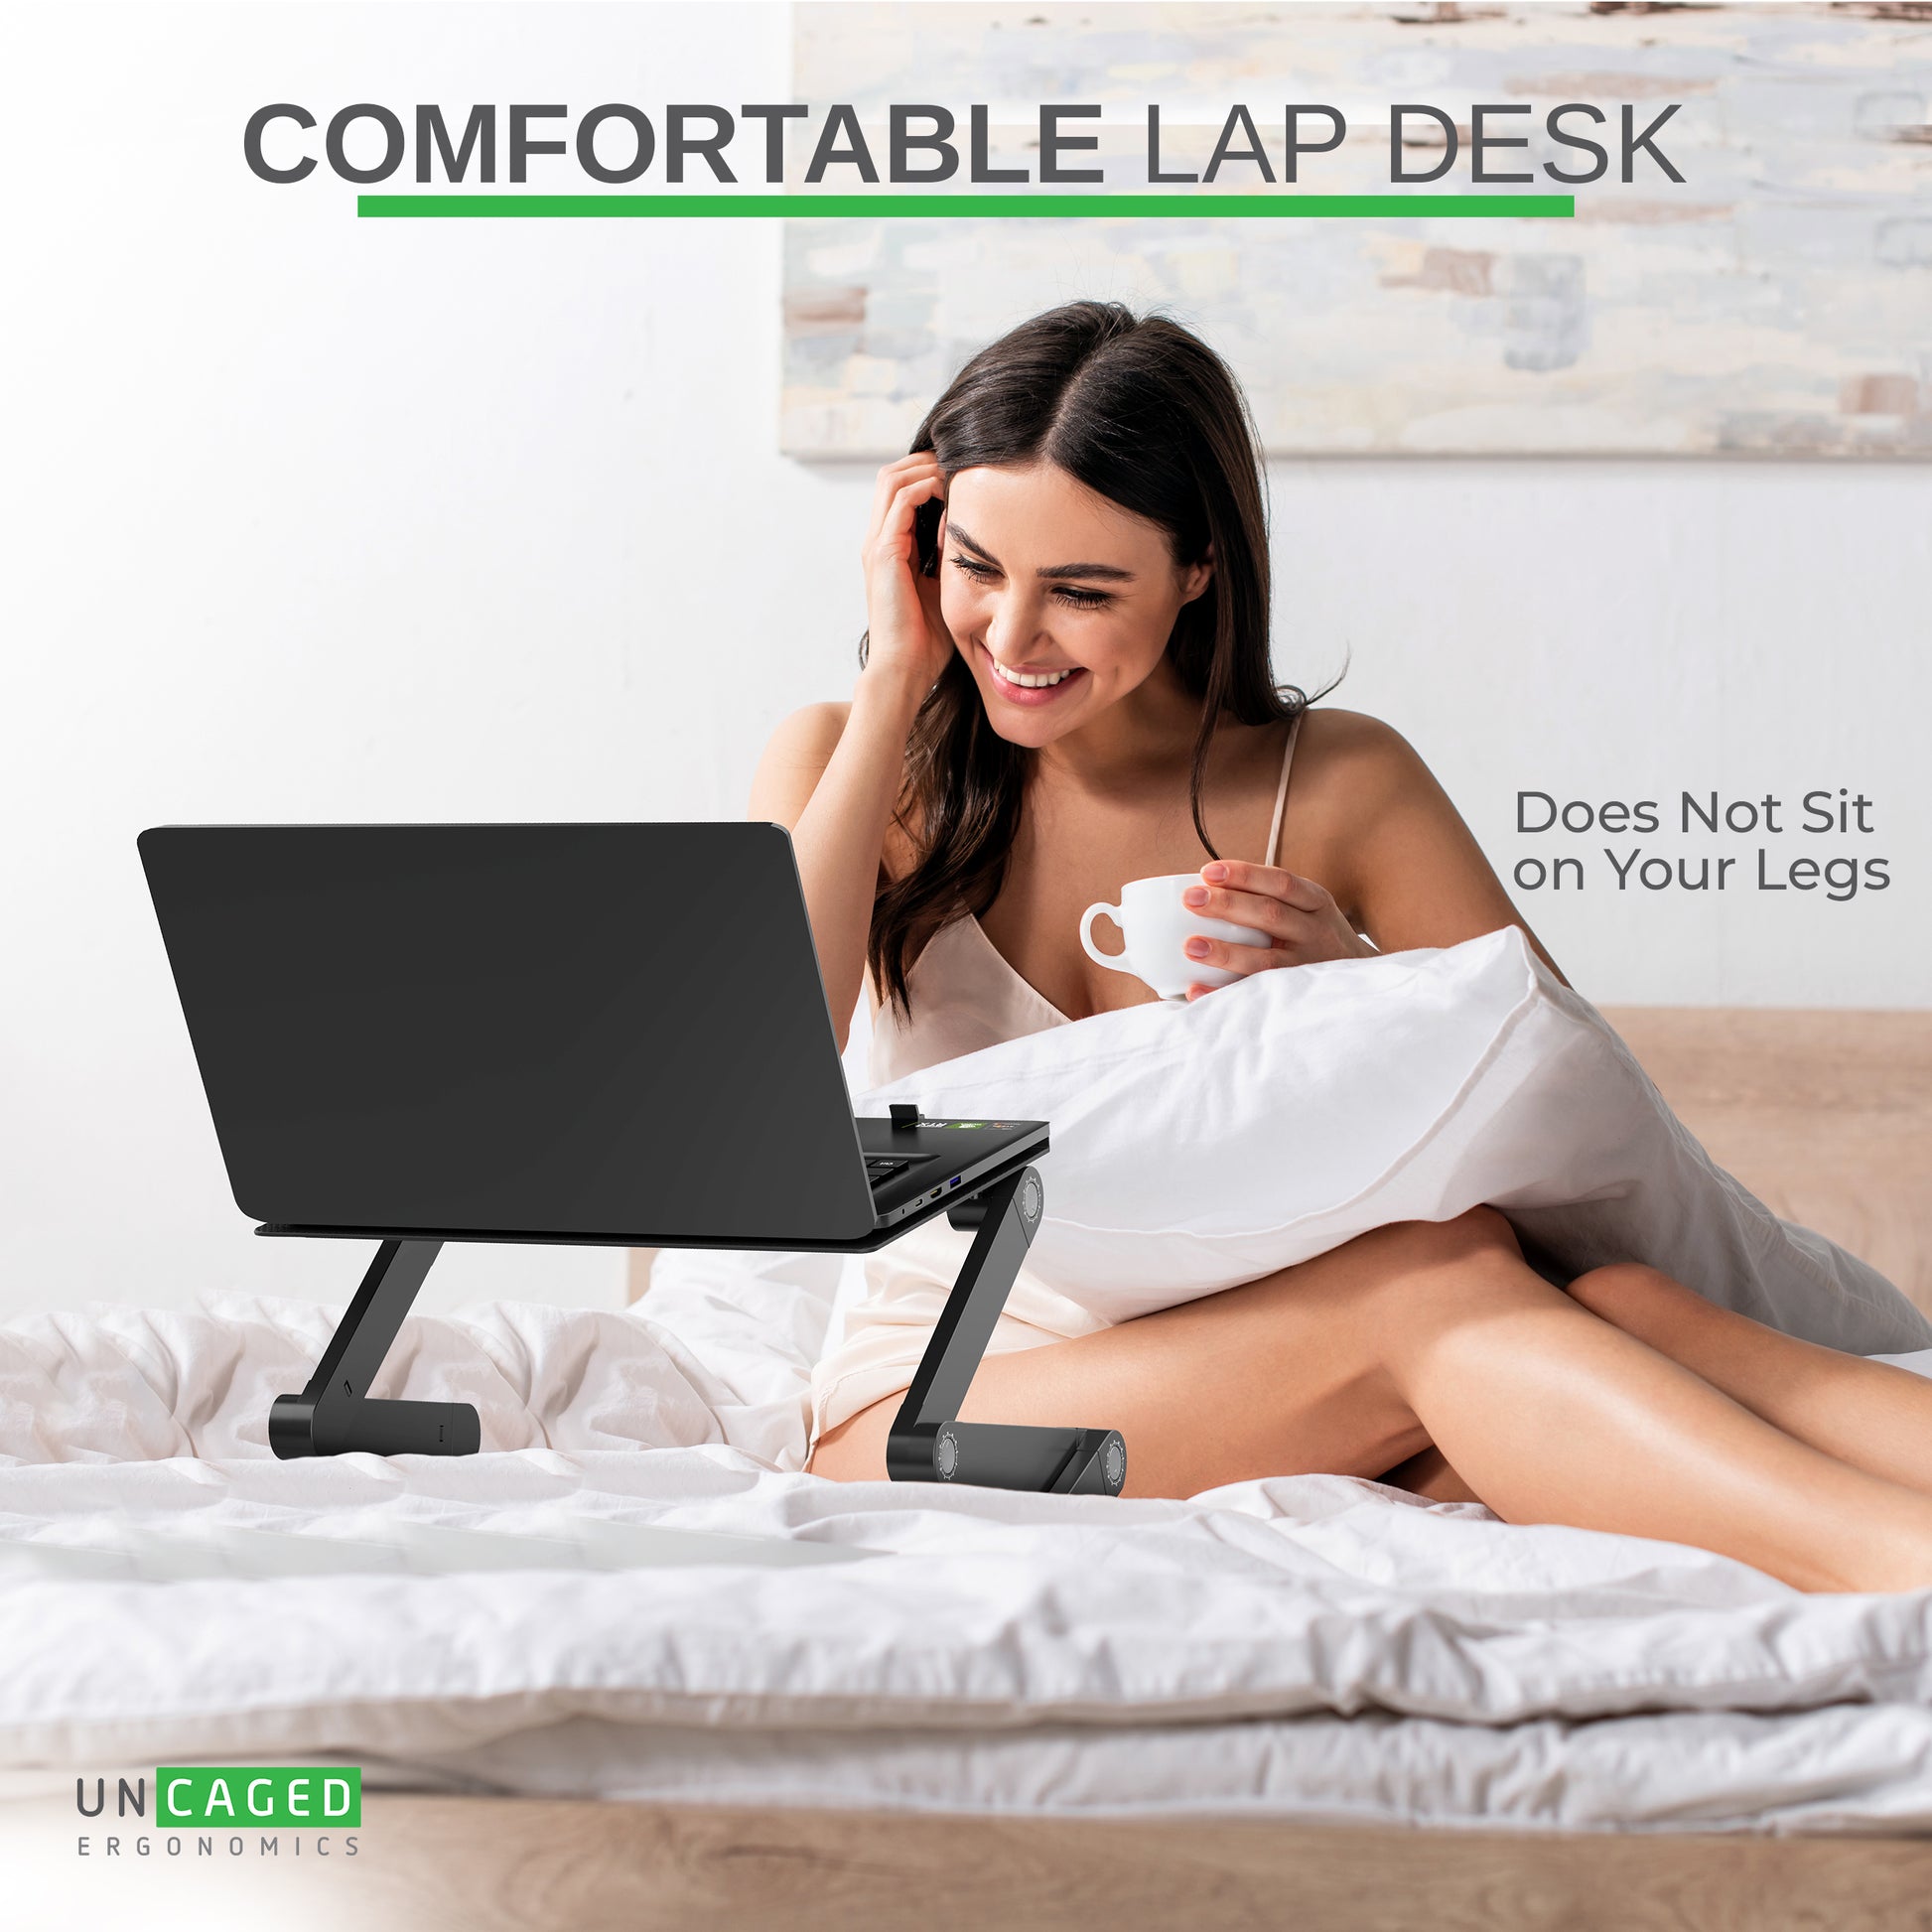  Lap Desk Laptop Bed Table: Fits up to 15.6 inch Laptop